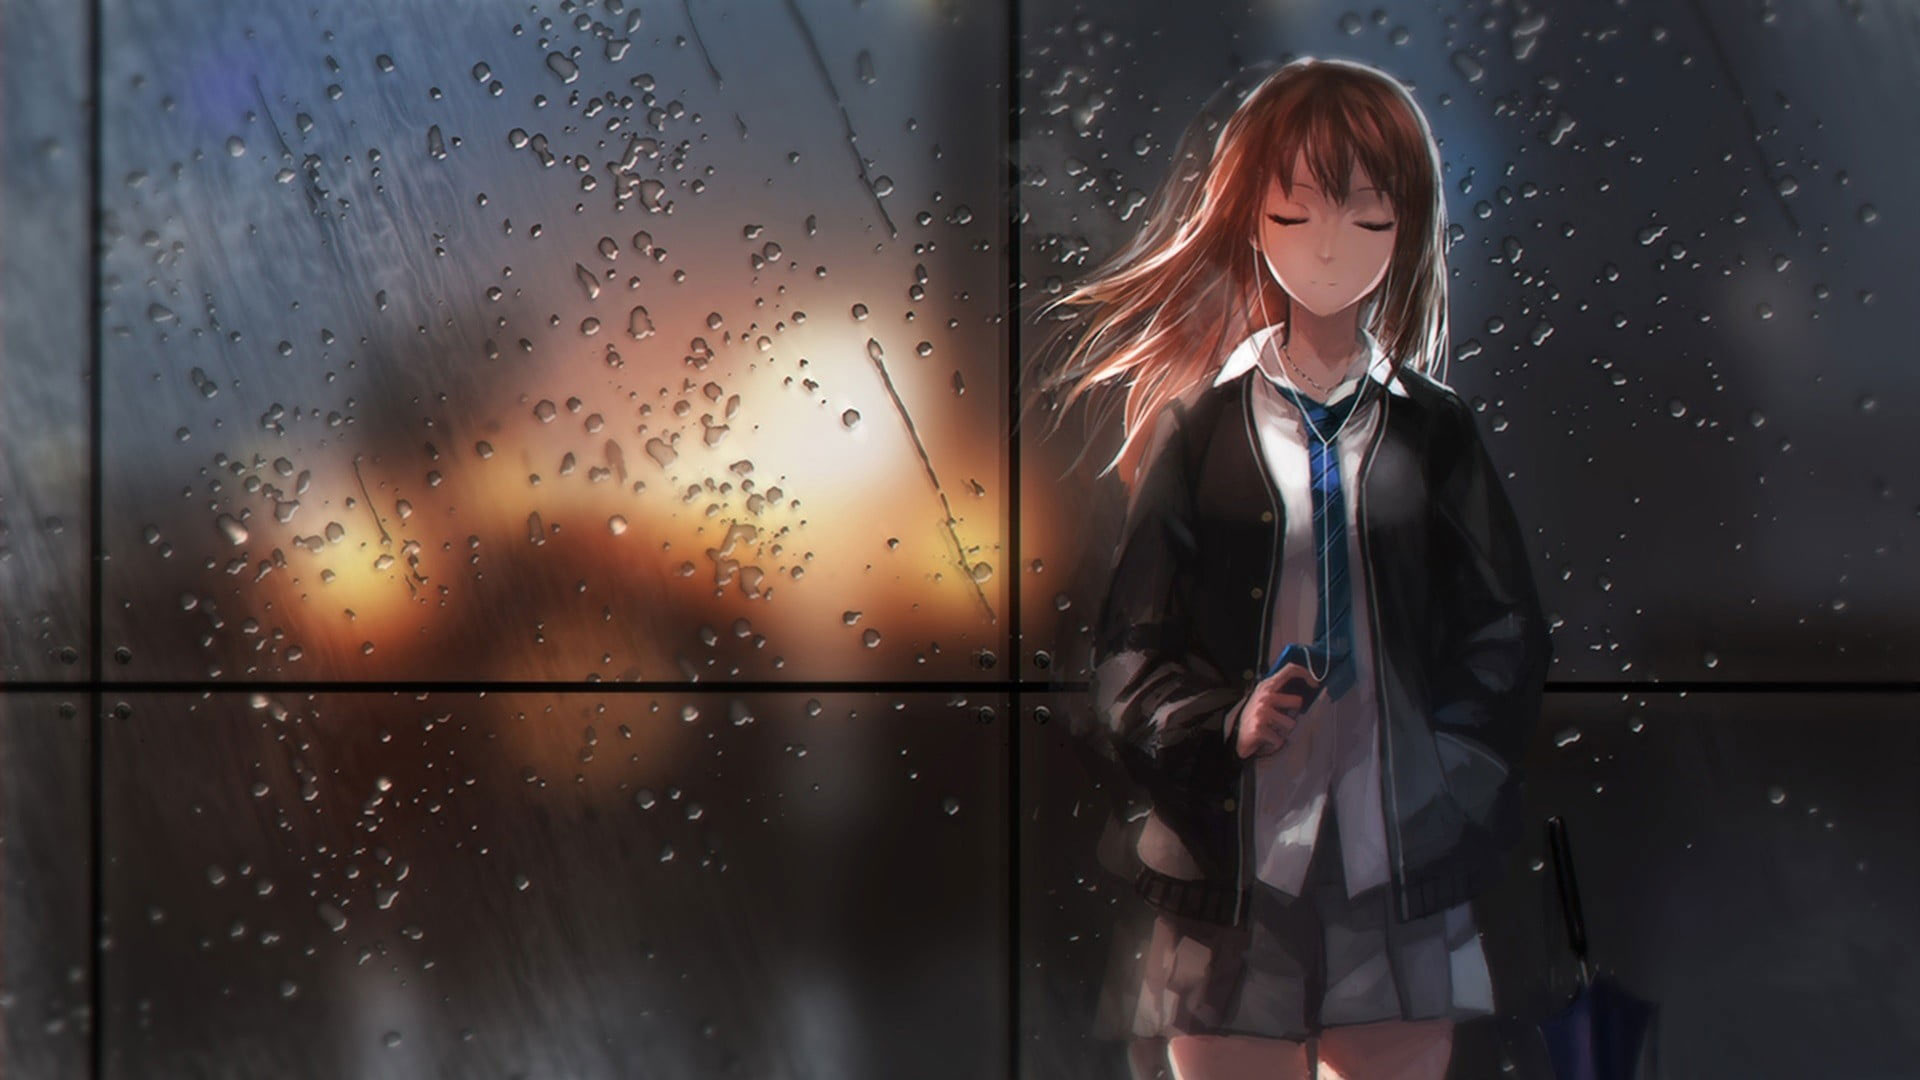 Brown-haired girl wearing jacket and earphones anime wallpaper